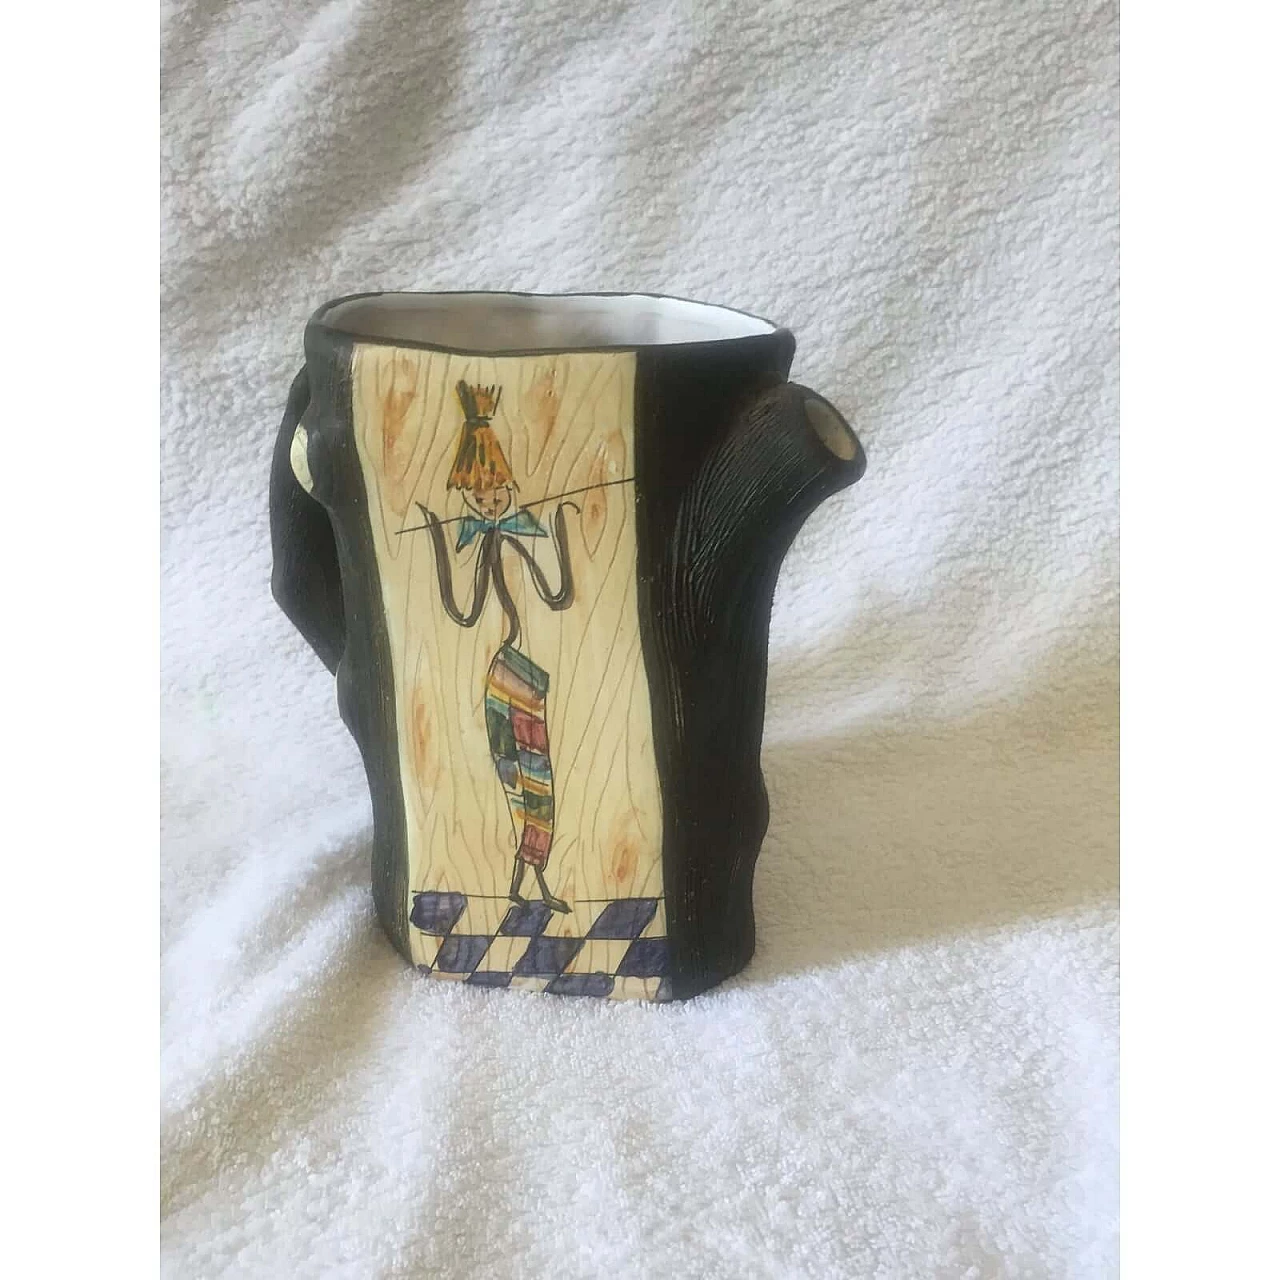 Ceramic jug painted with stylised figures, 1960s 1374961